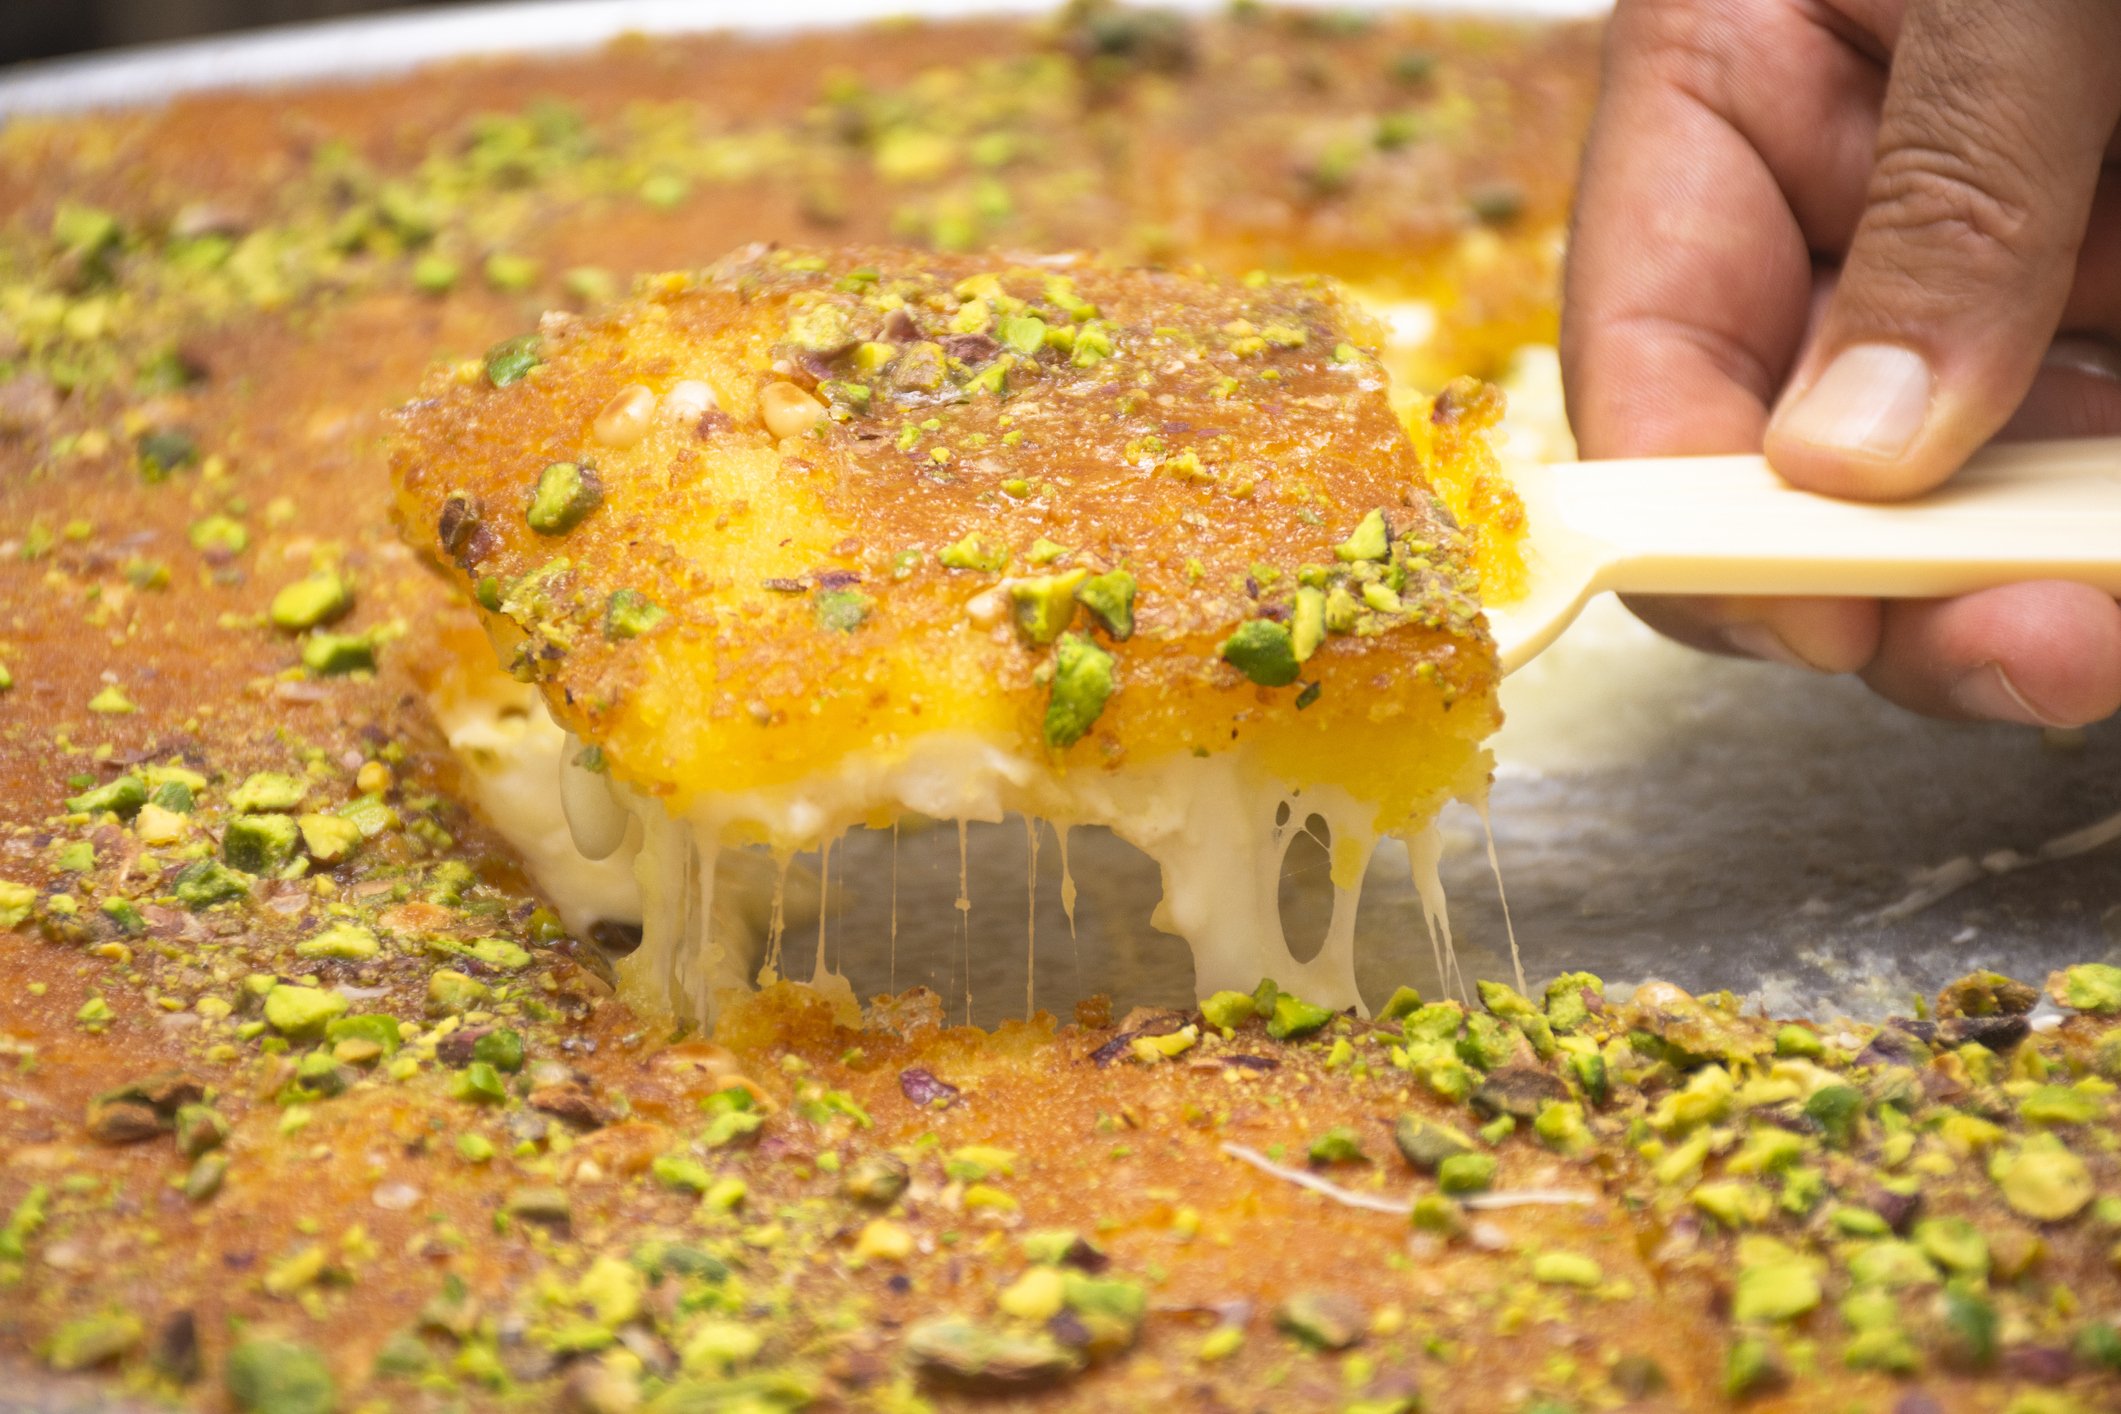 How To Make an Epic Knafeh in Time for Eid